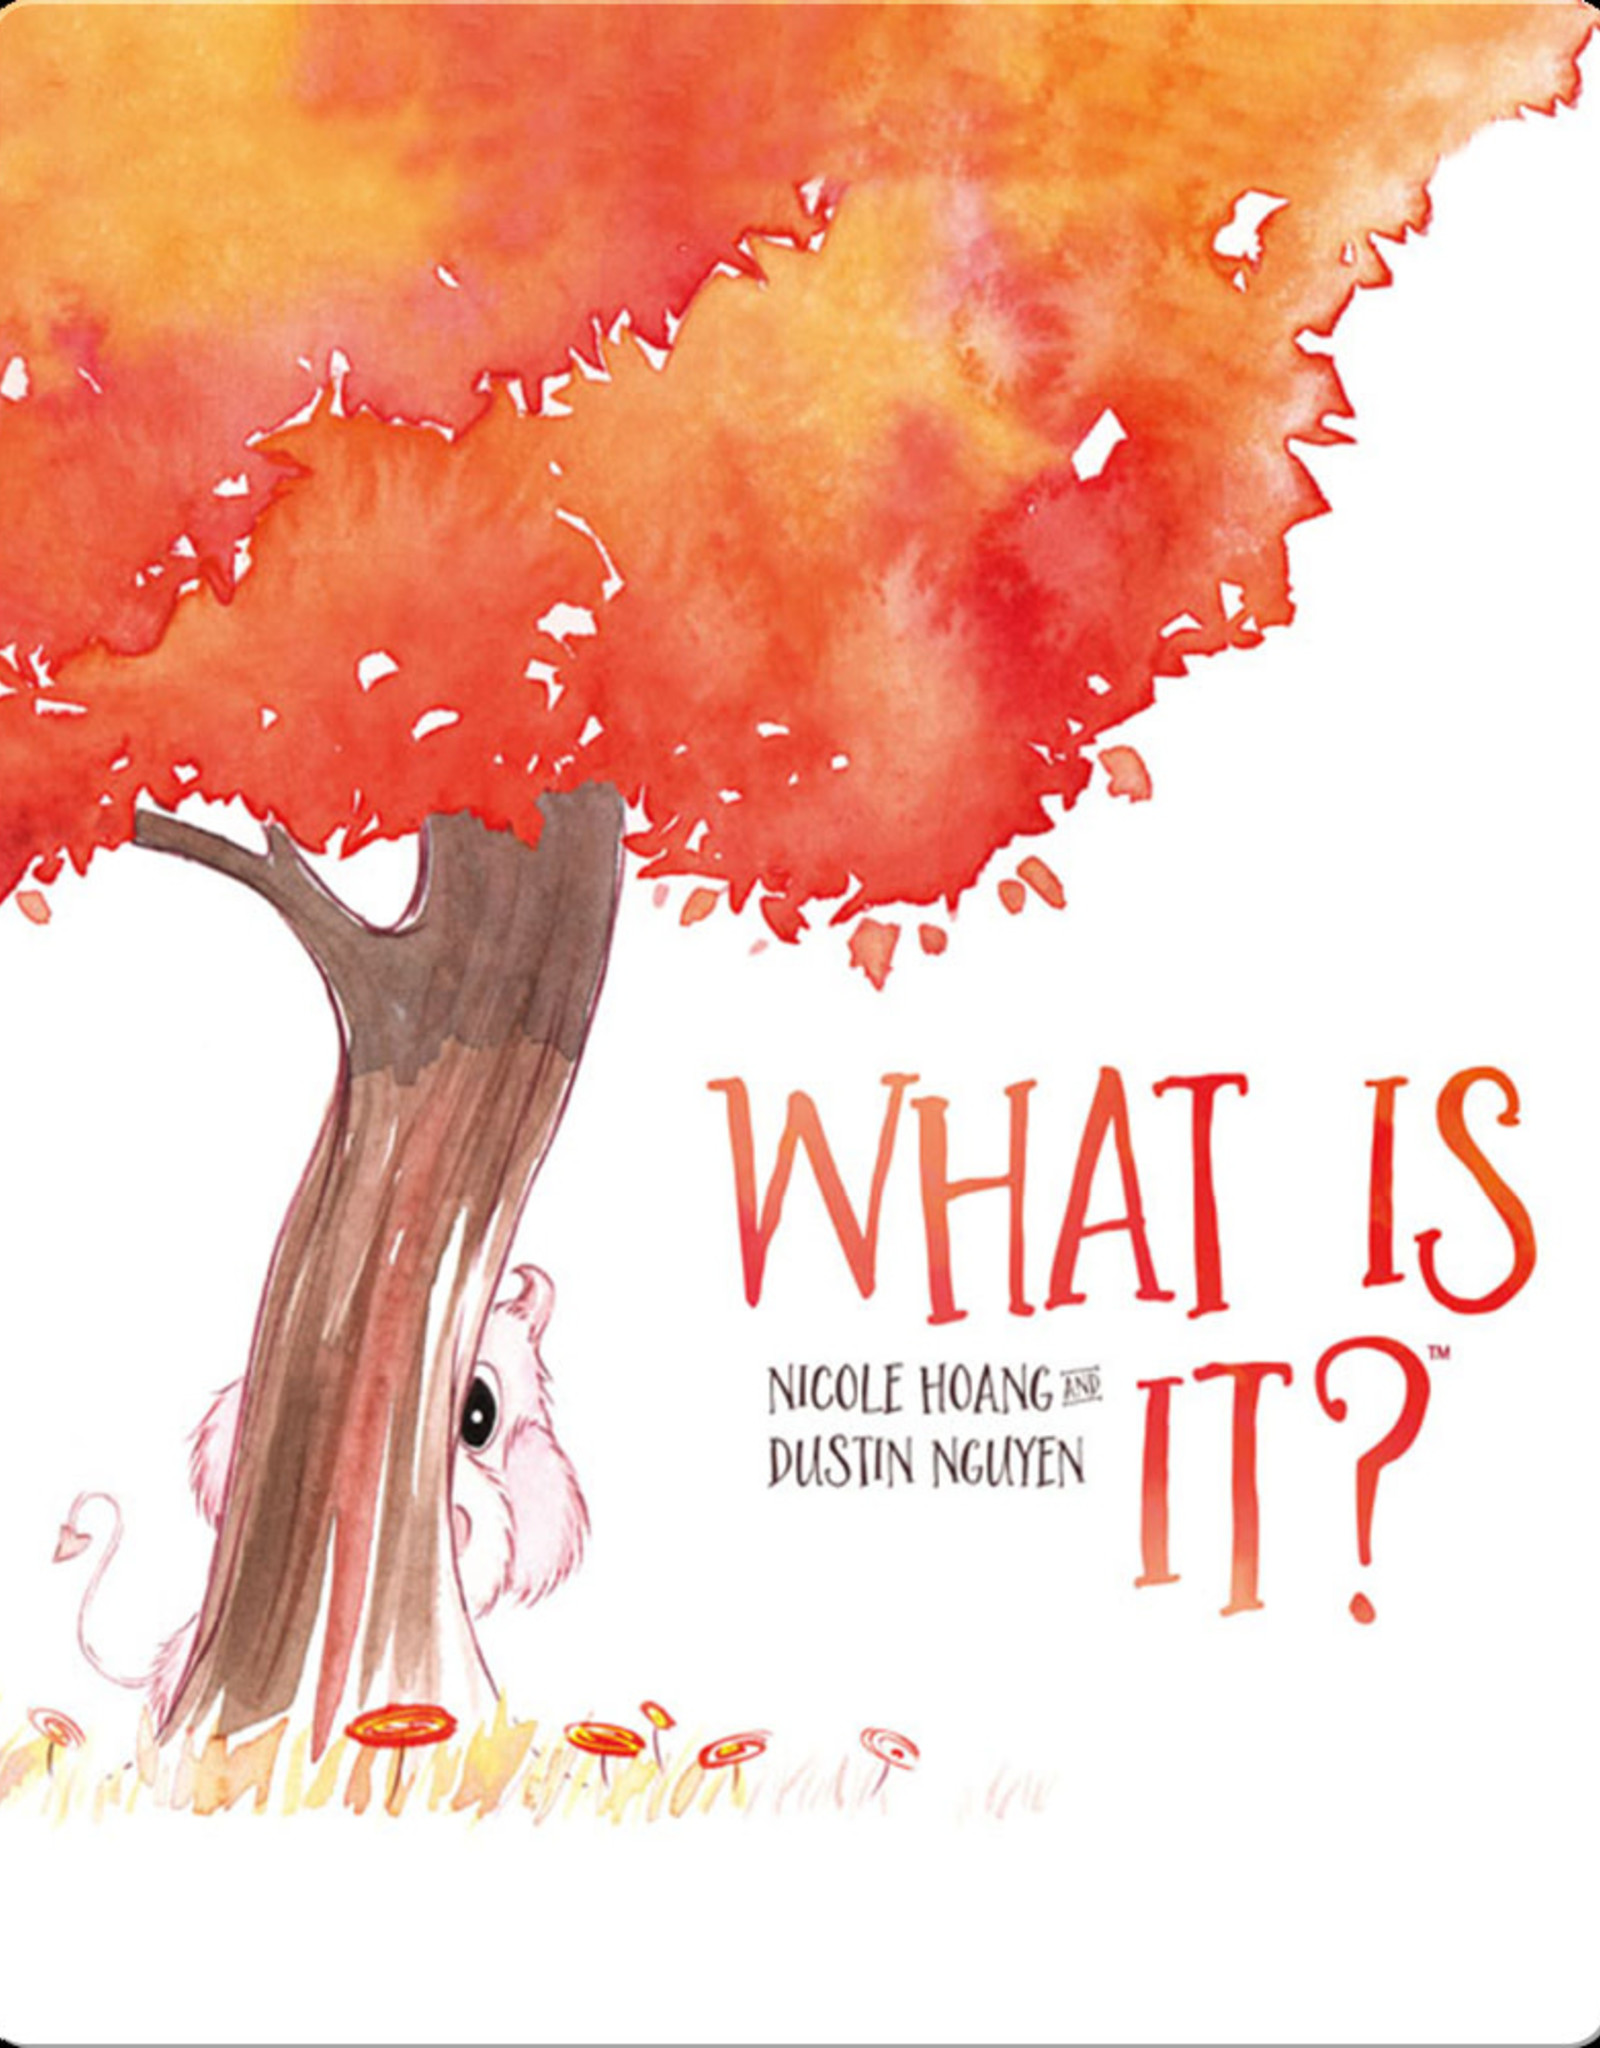 kaboom What Is It? by Nicole Hoang and Dustin Nguyen